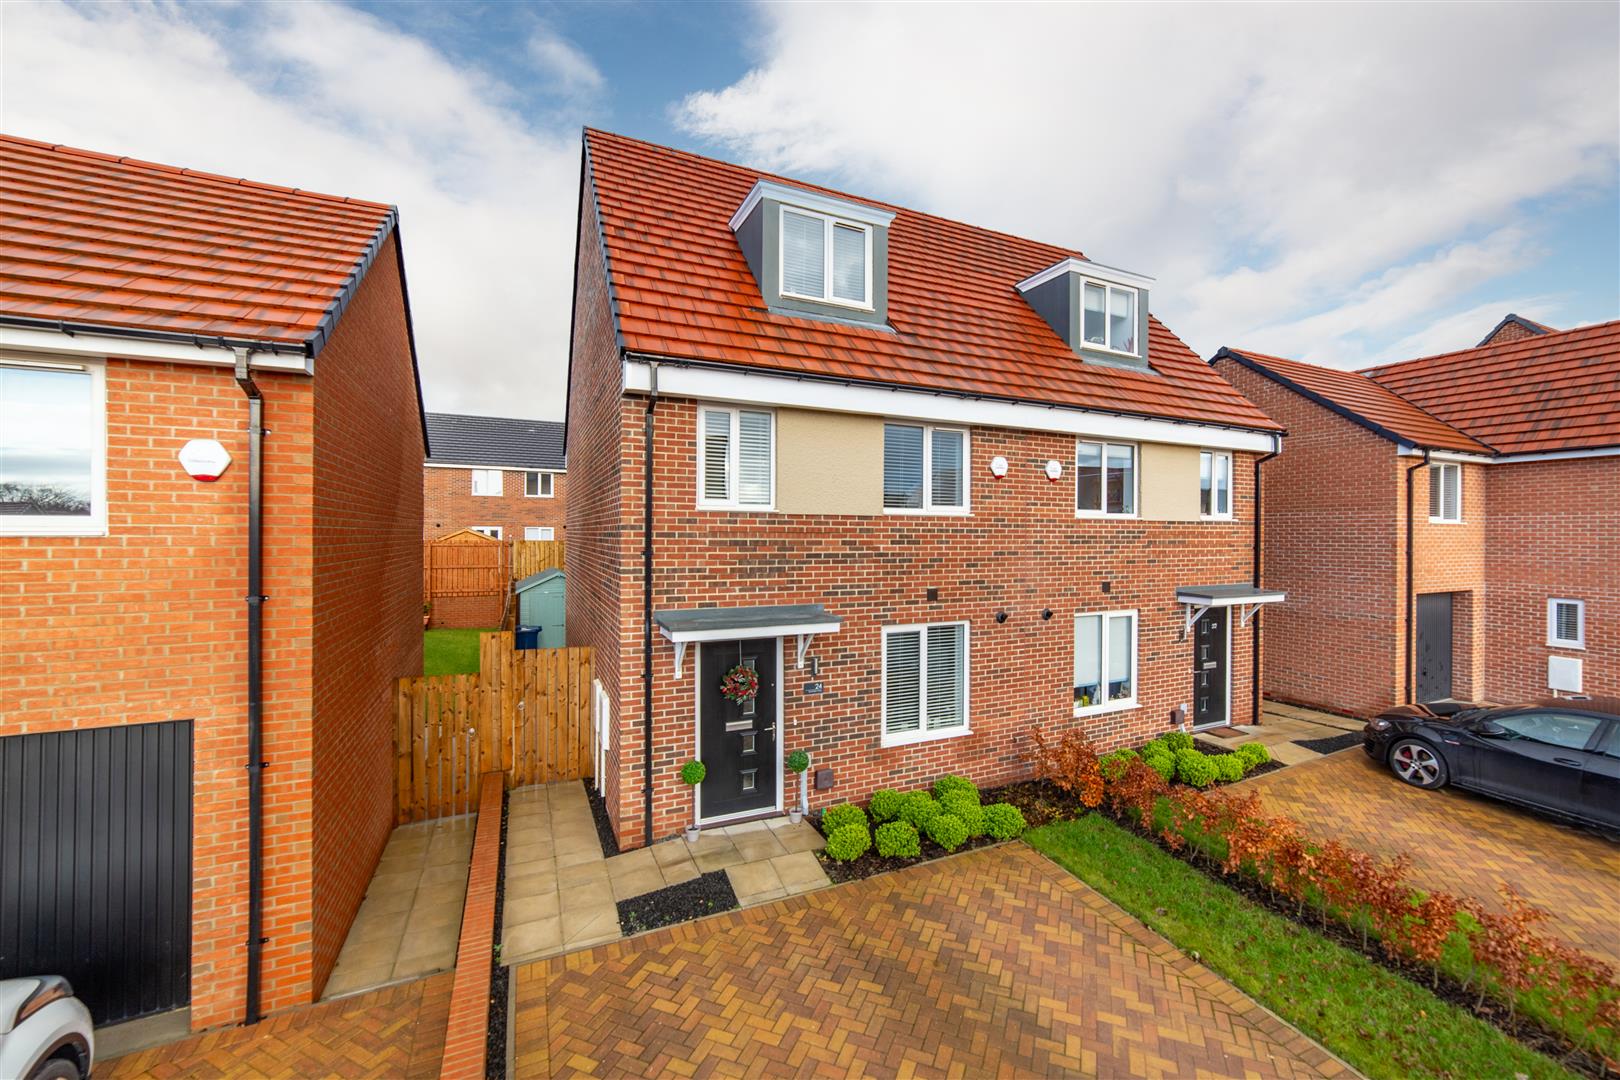 3 bed semi-detached house for sale in Bramble Way, Great Park, NE13